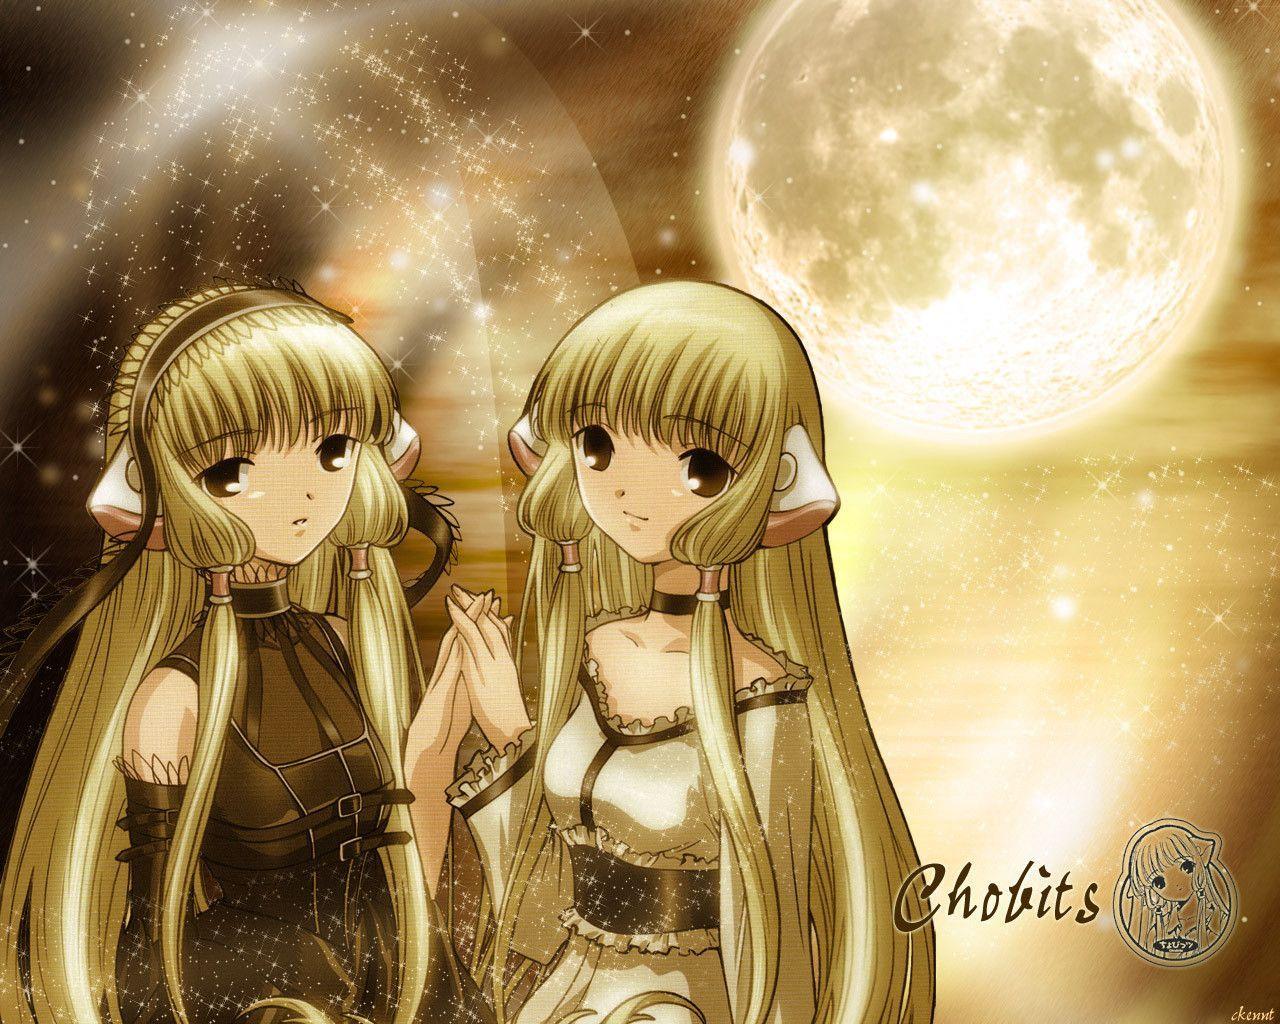 Chobits Chii, The first